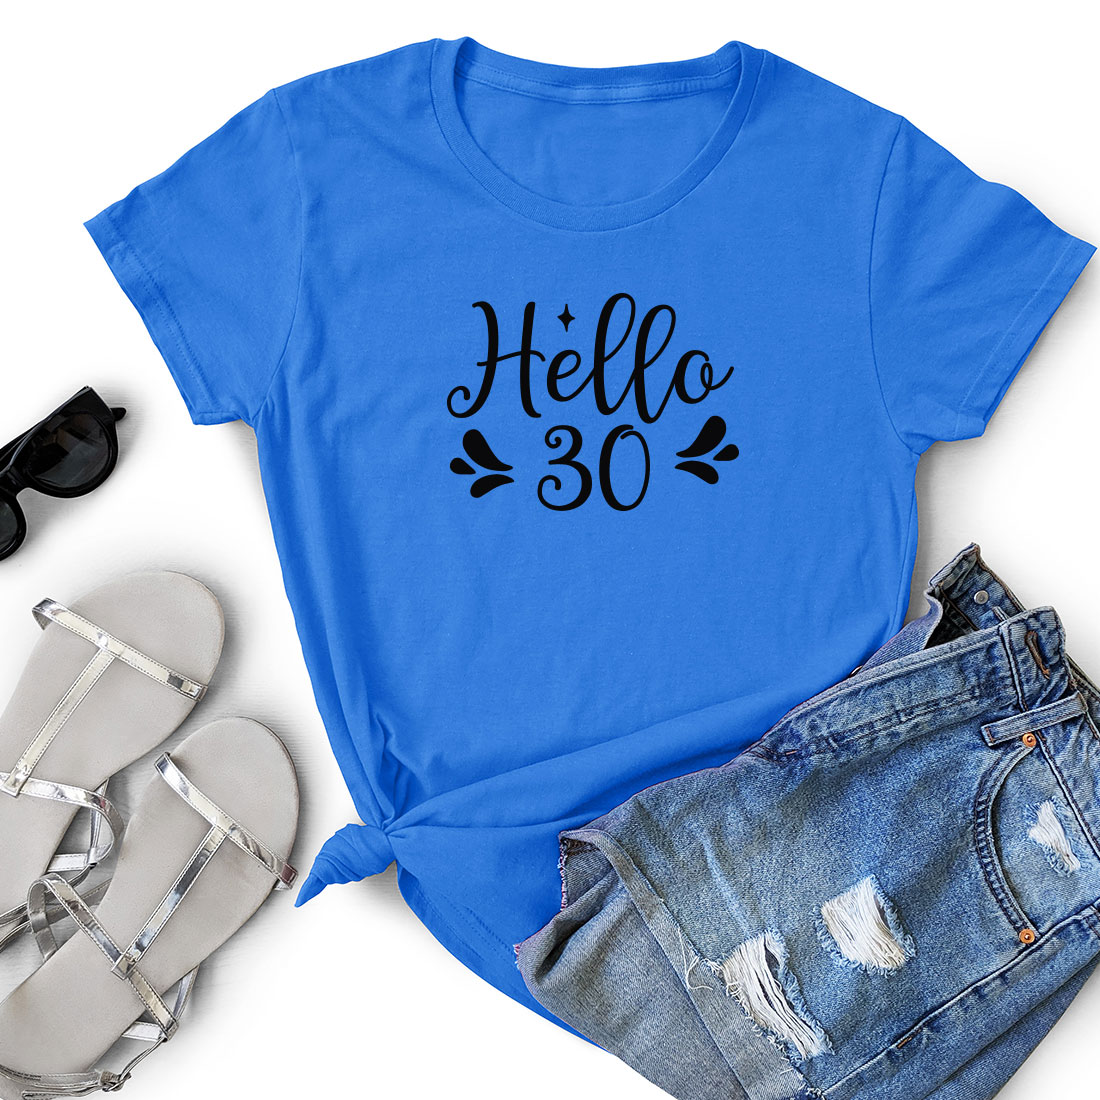 Blue shirt with the word hello written on it.